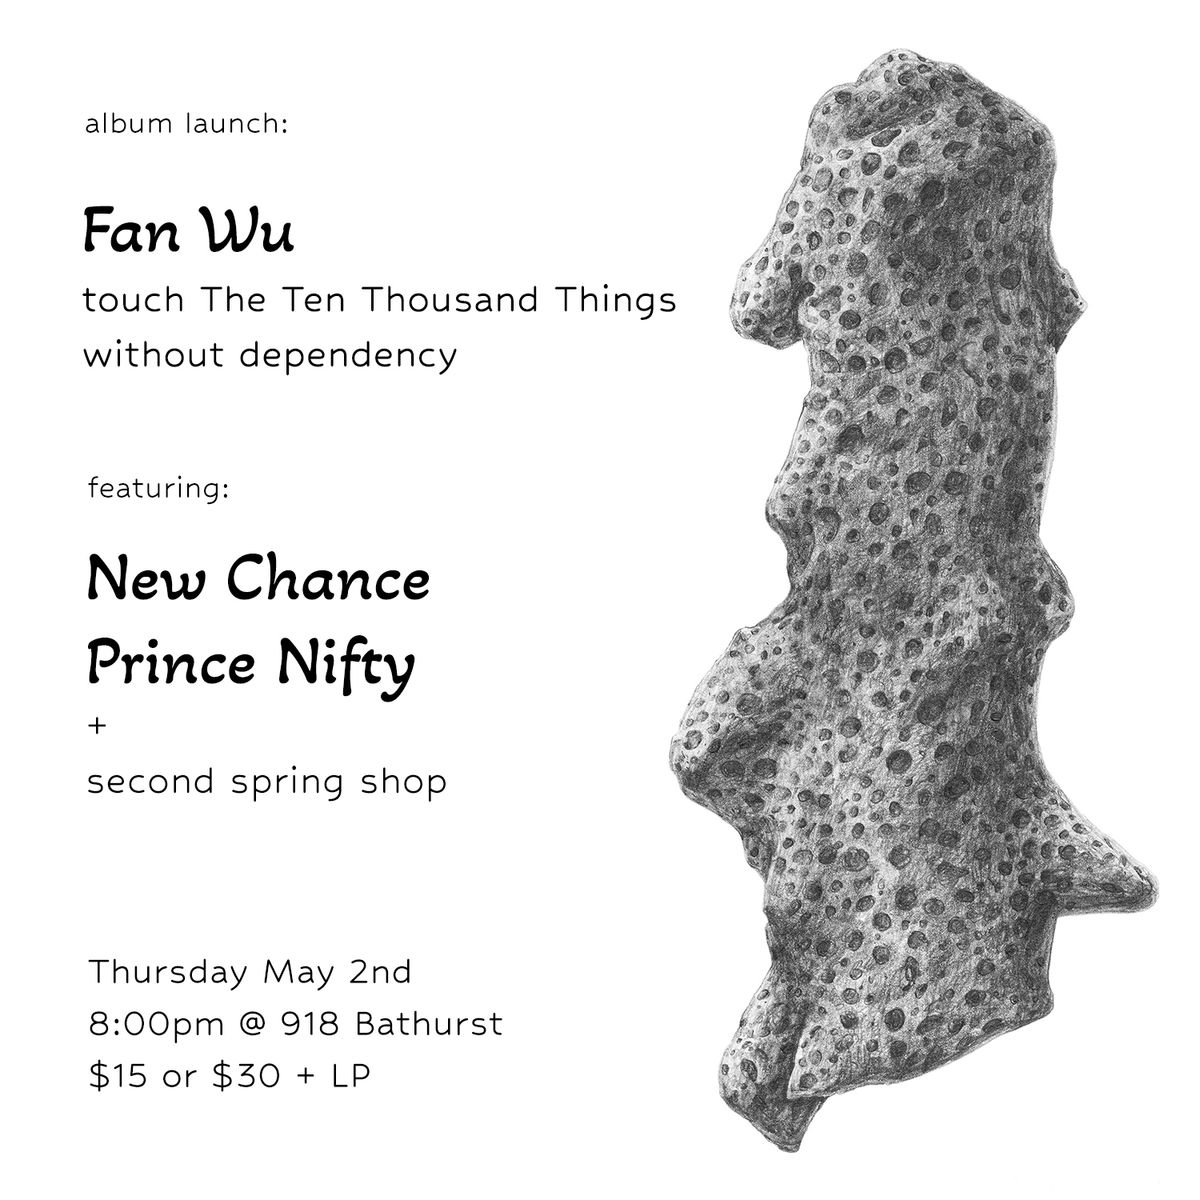 Album launch for FAN WU Ft. NEW CHANCE + PRINCE NIFTY